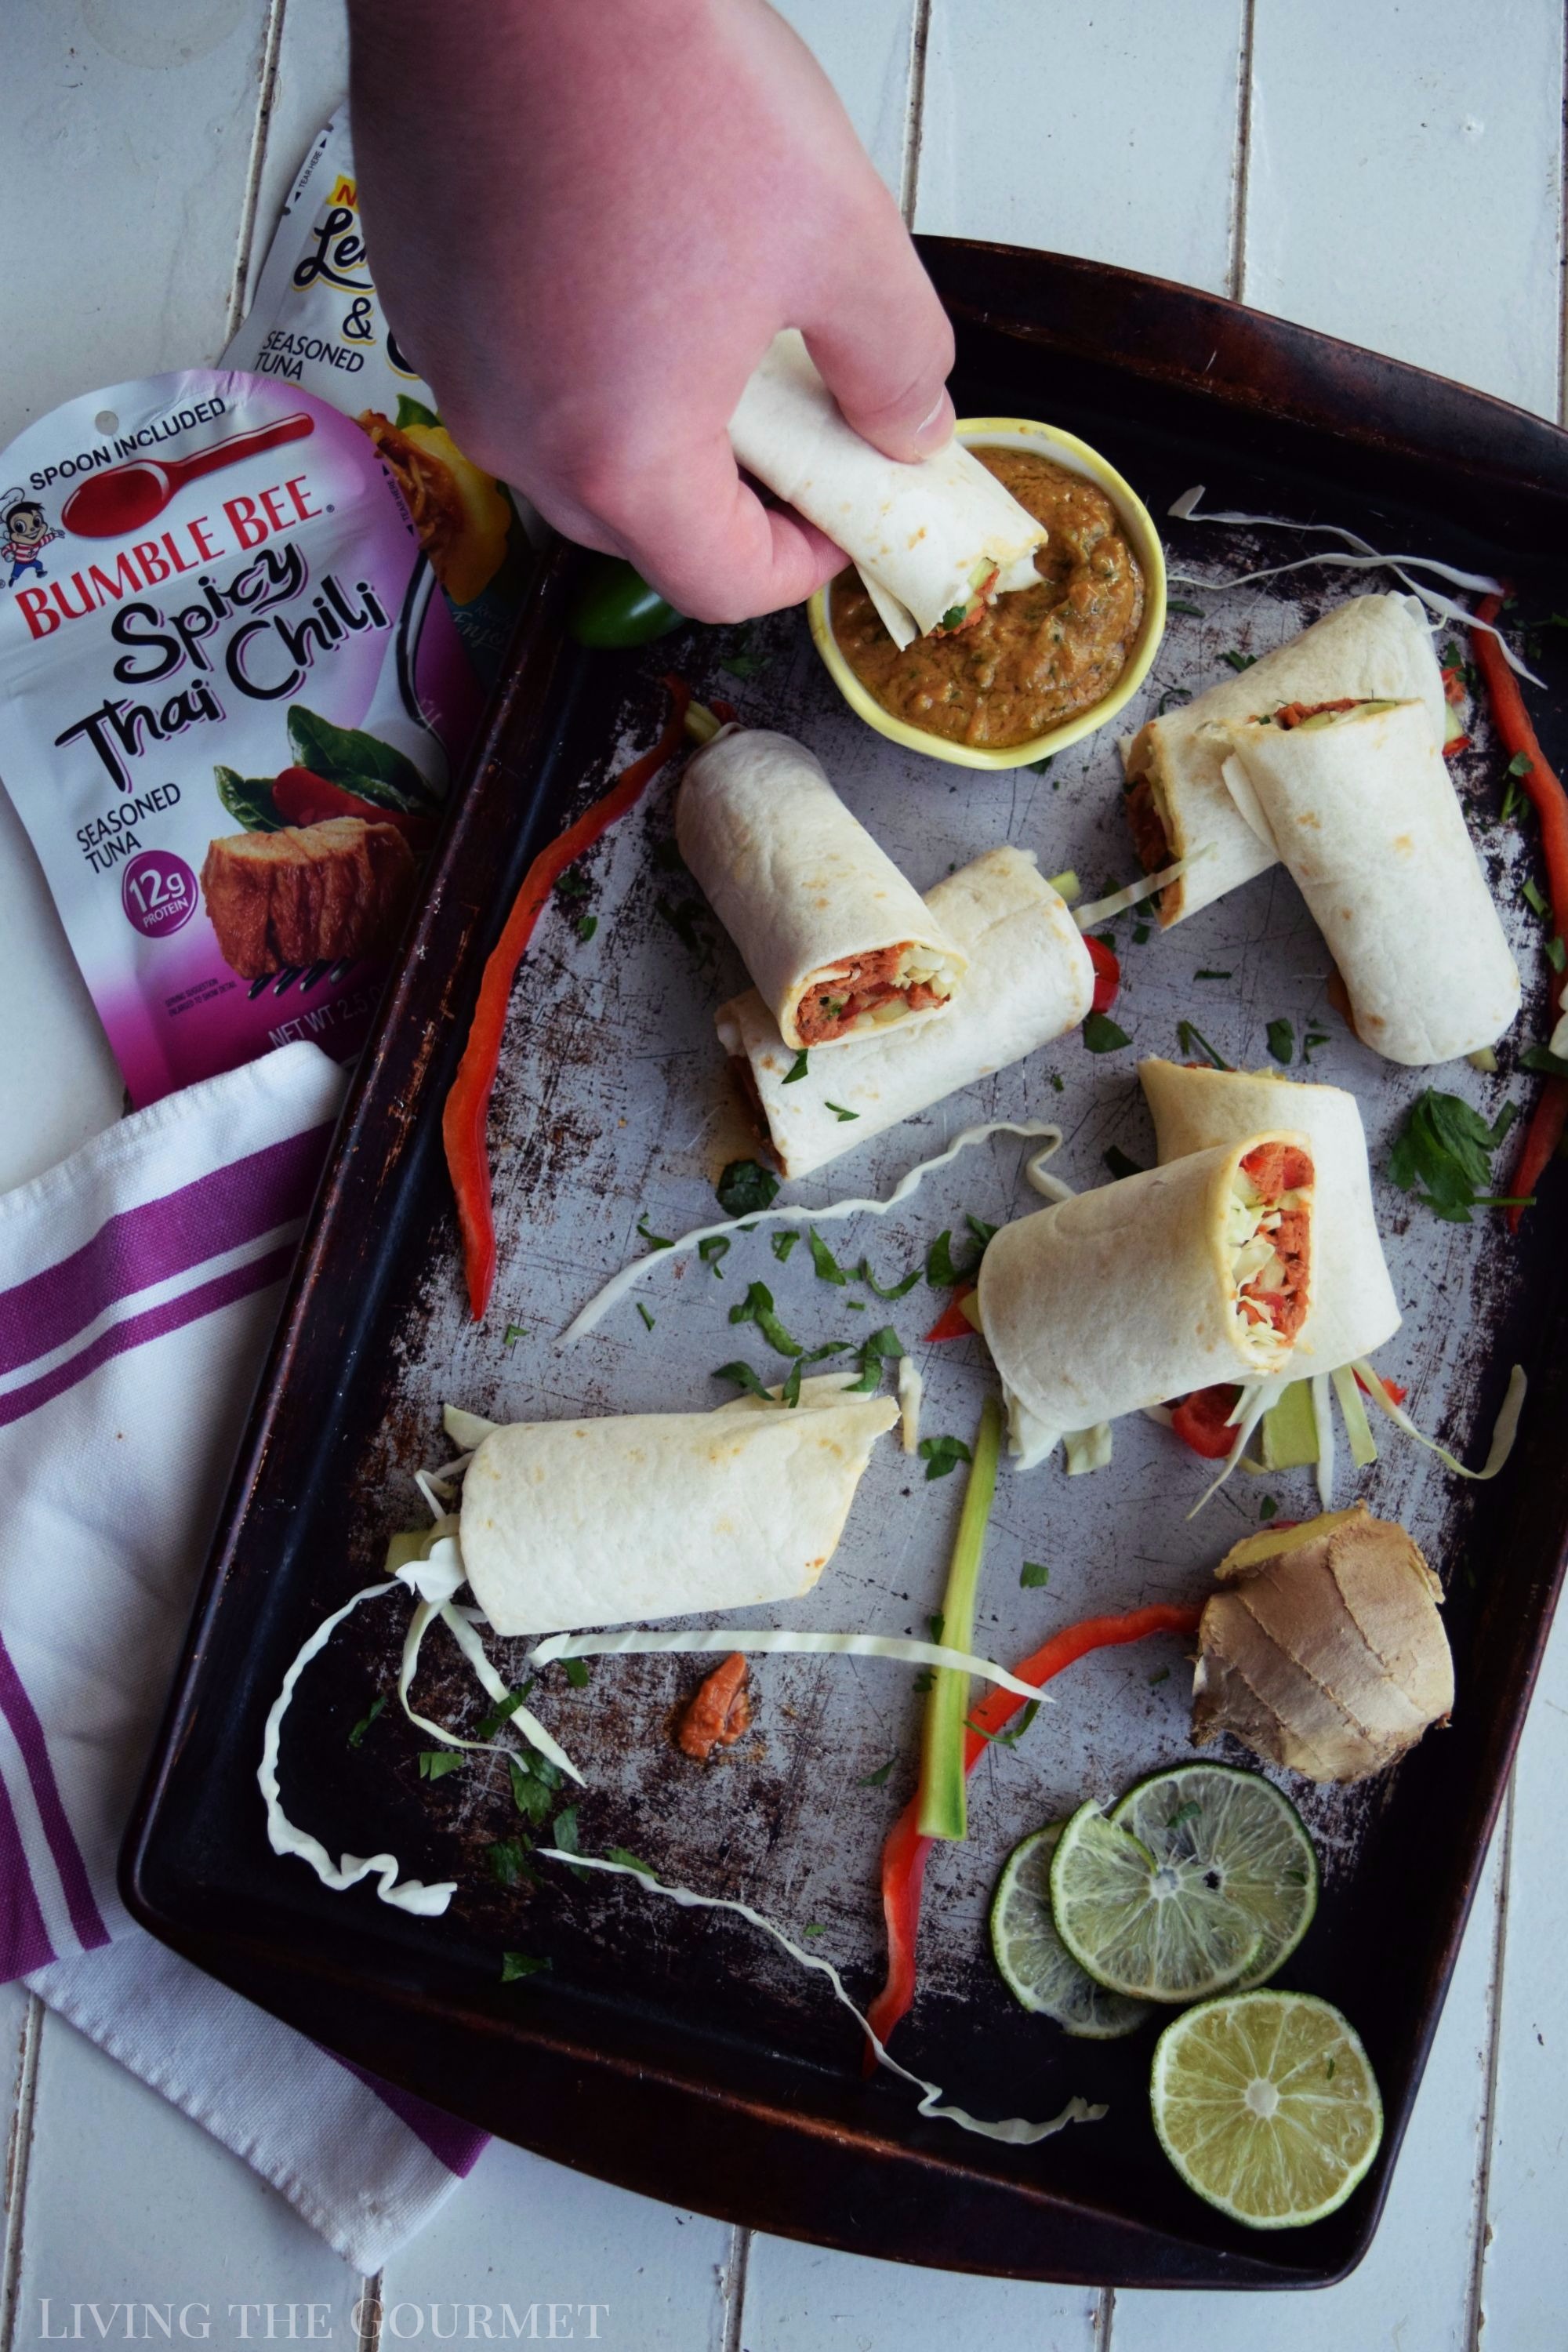 Whether you're on the go or looking for something simple and satisfying, these Spicy Thai Tuna Wraps are sure to hit the spot!